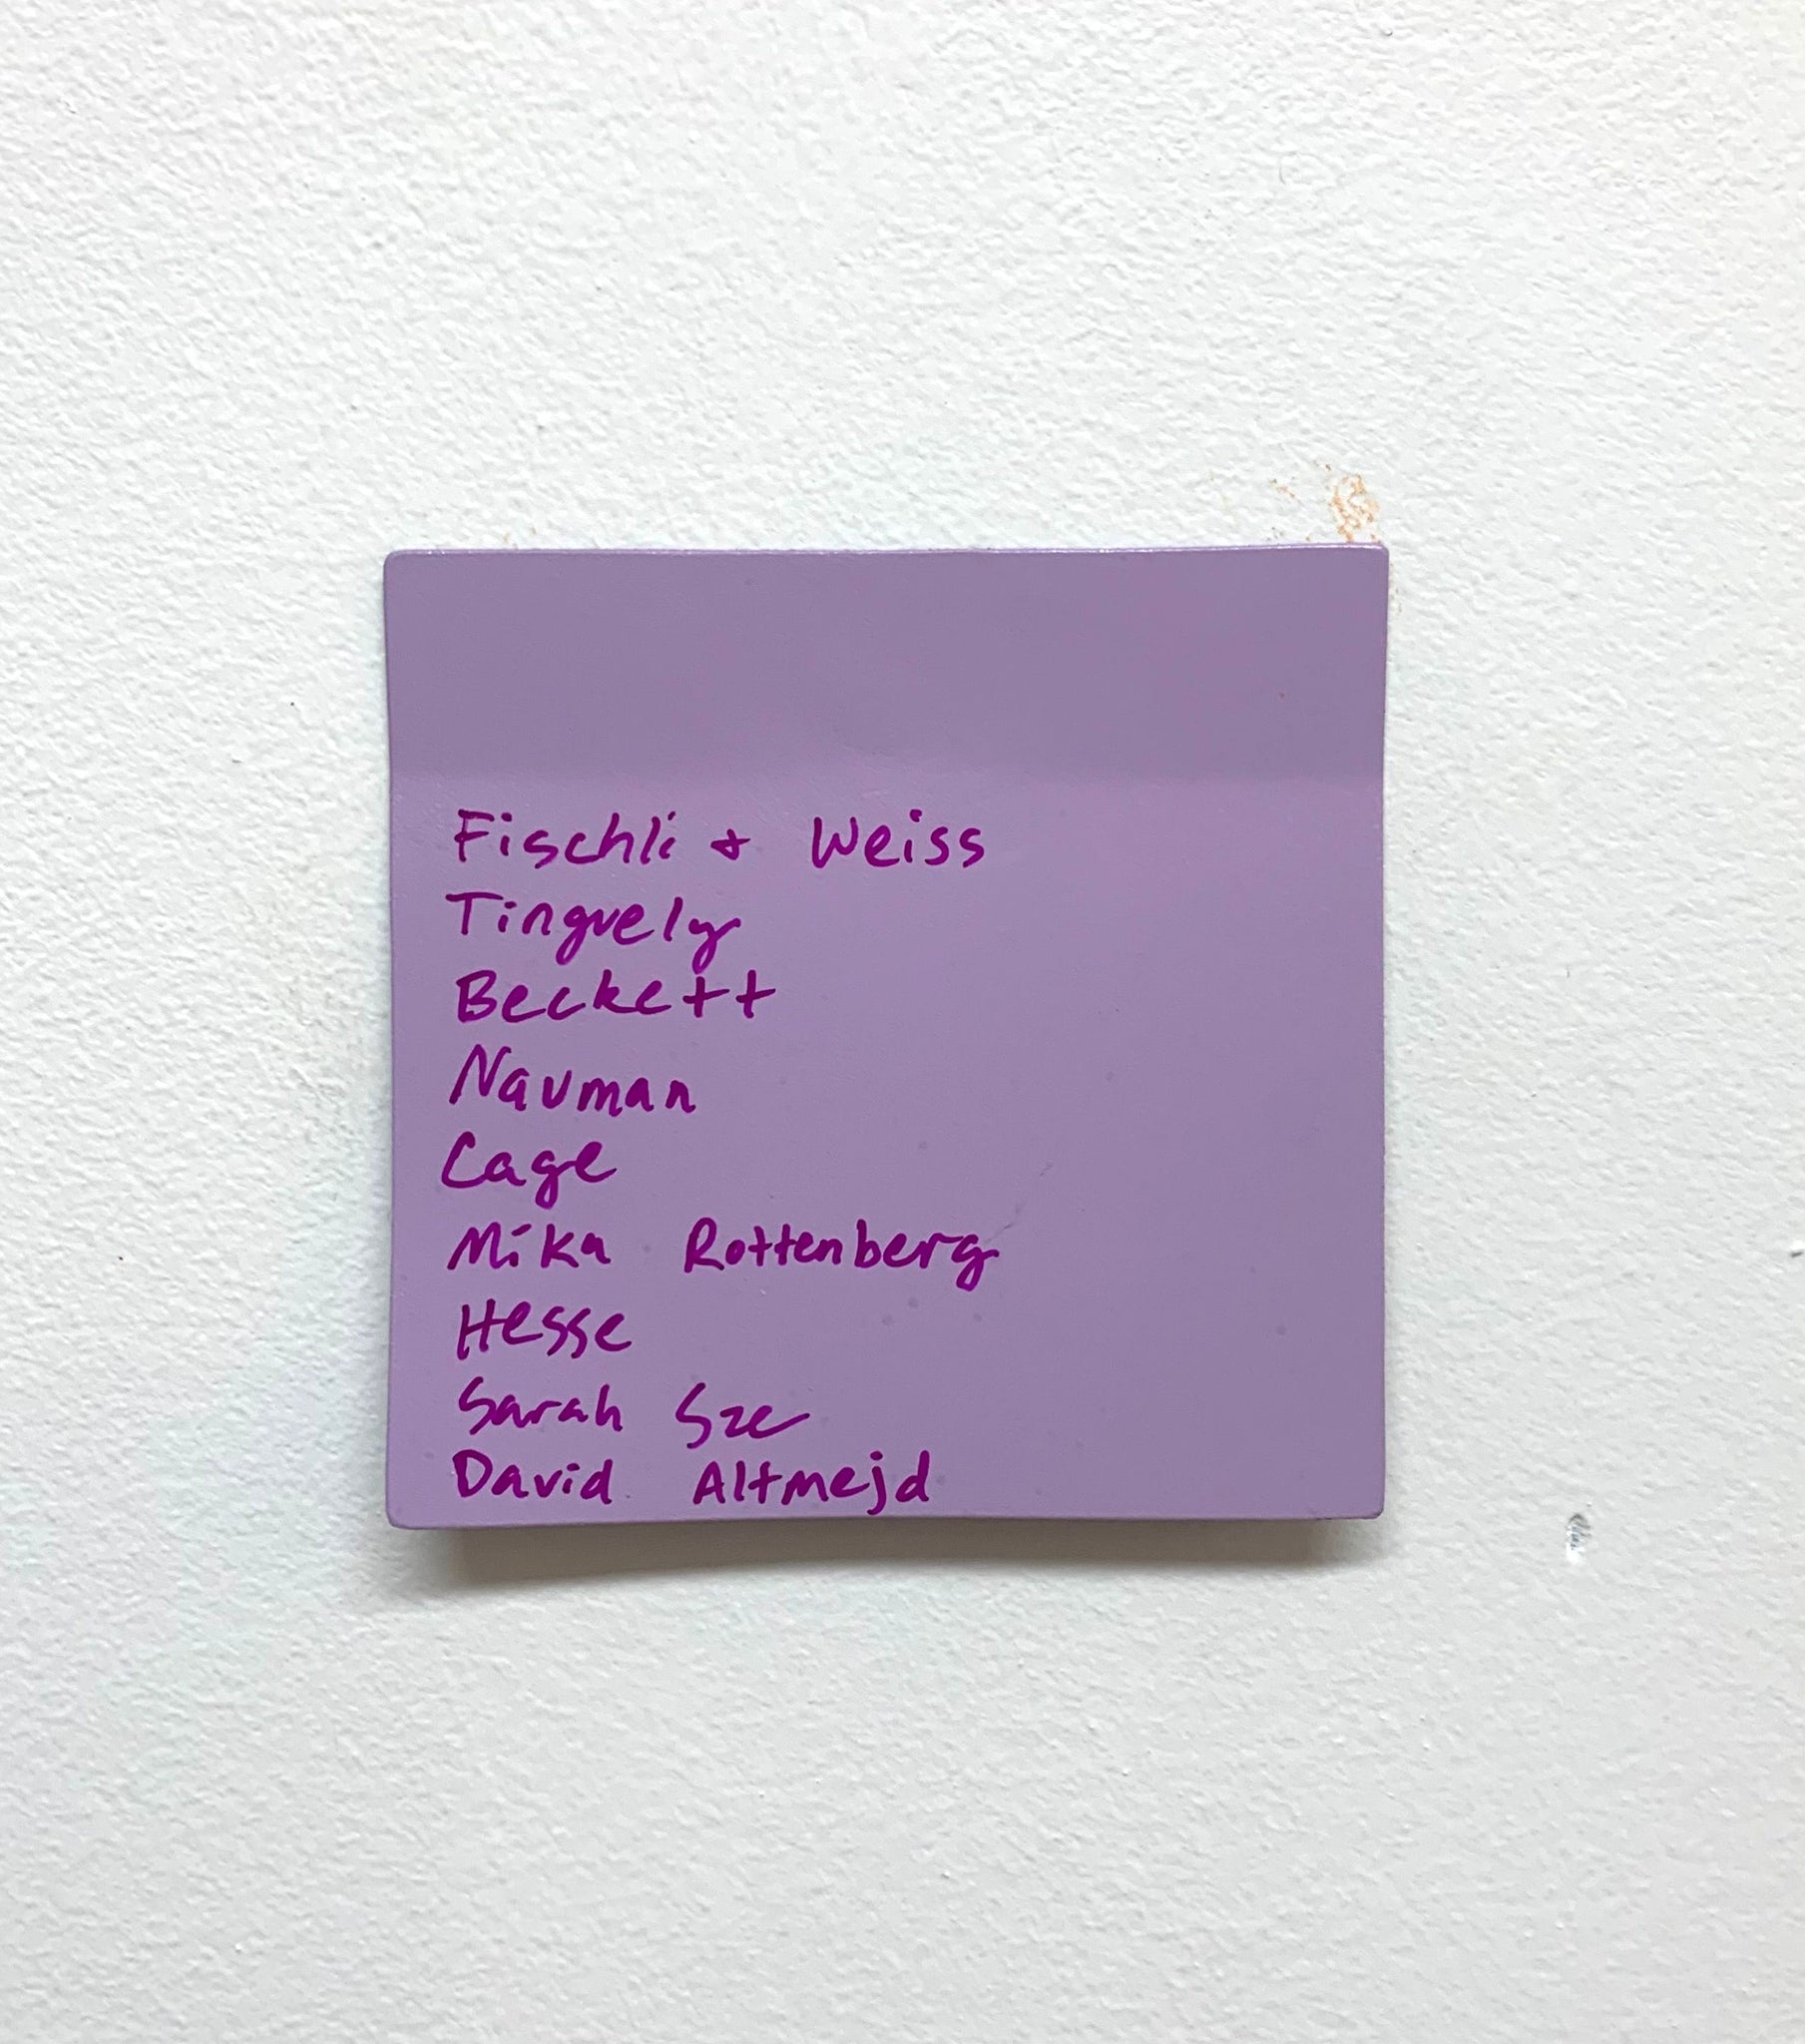 Stuart Lantry, "List of most influential artists on my work"